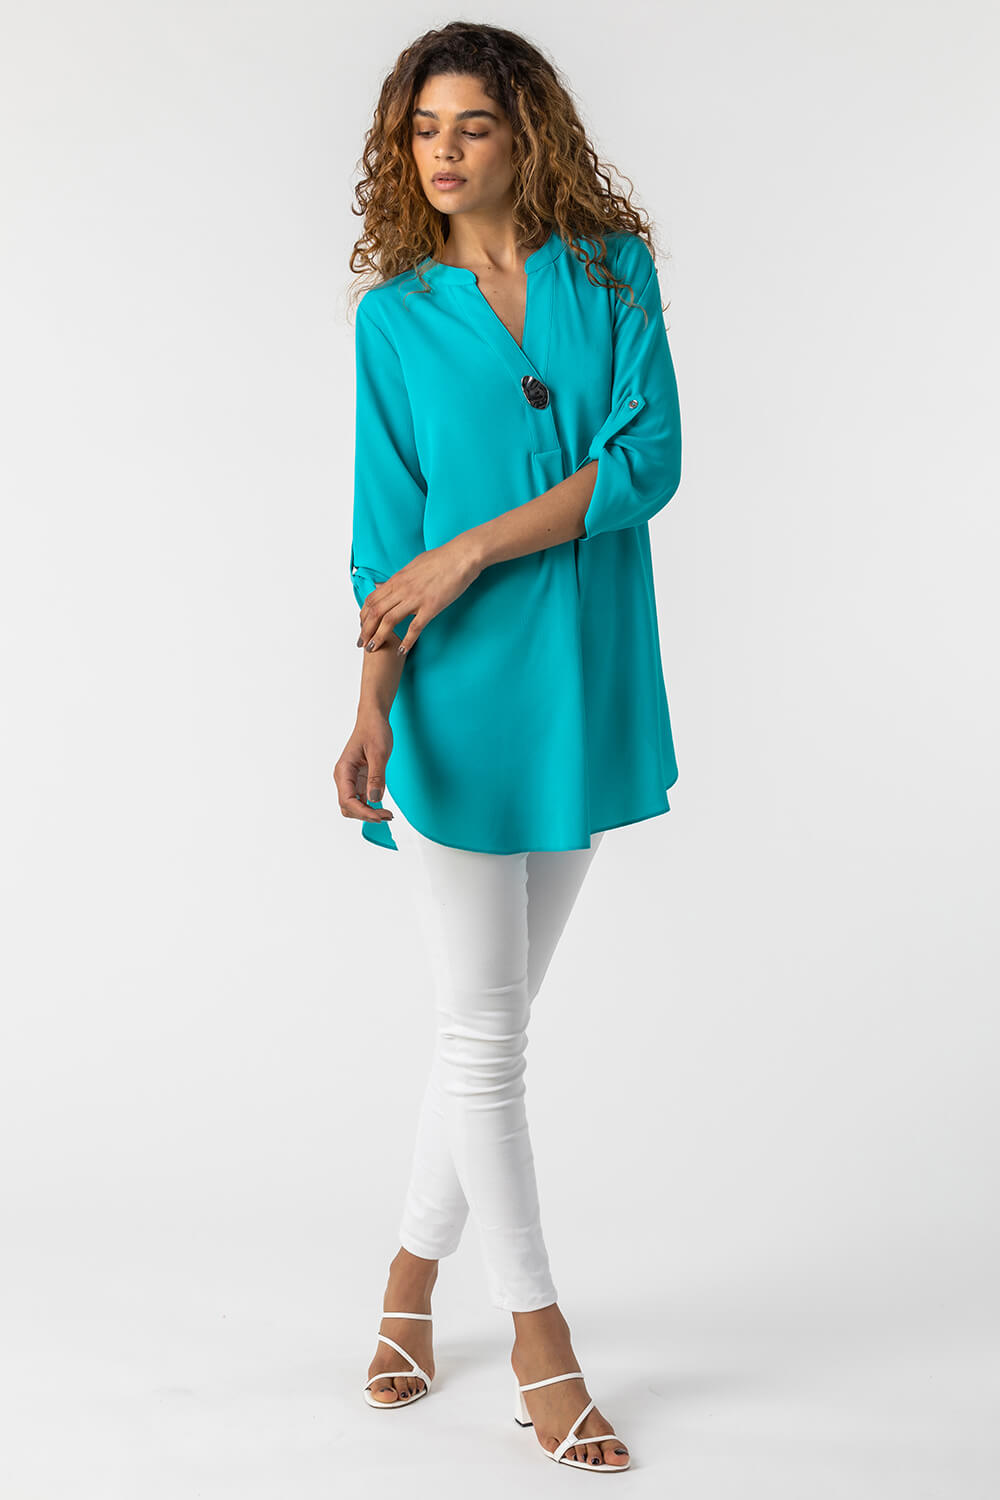 Turquoise Longline Button Detail Tunic Top, Image 3 of 4